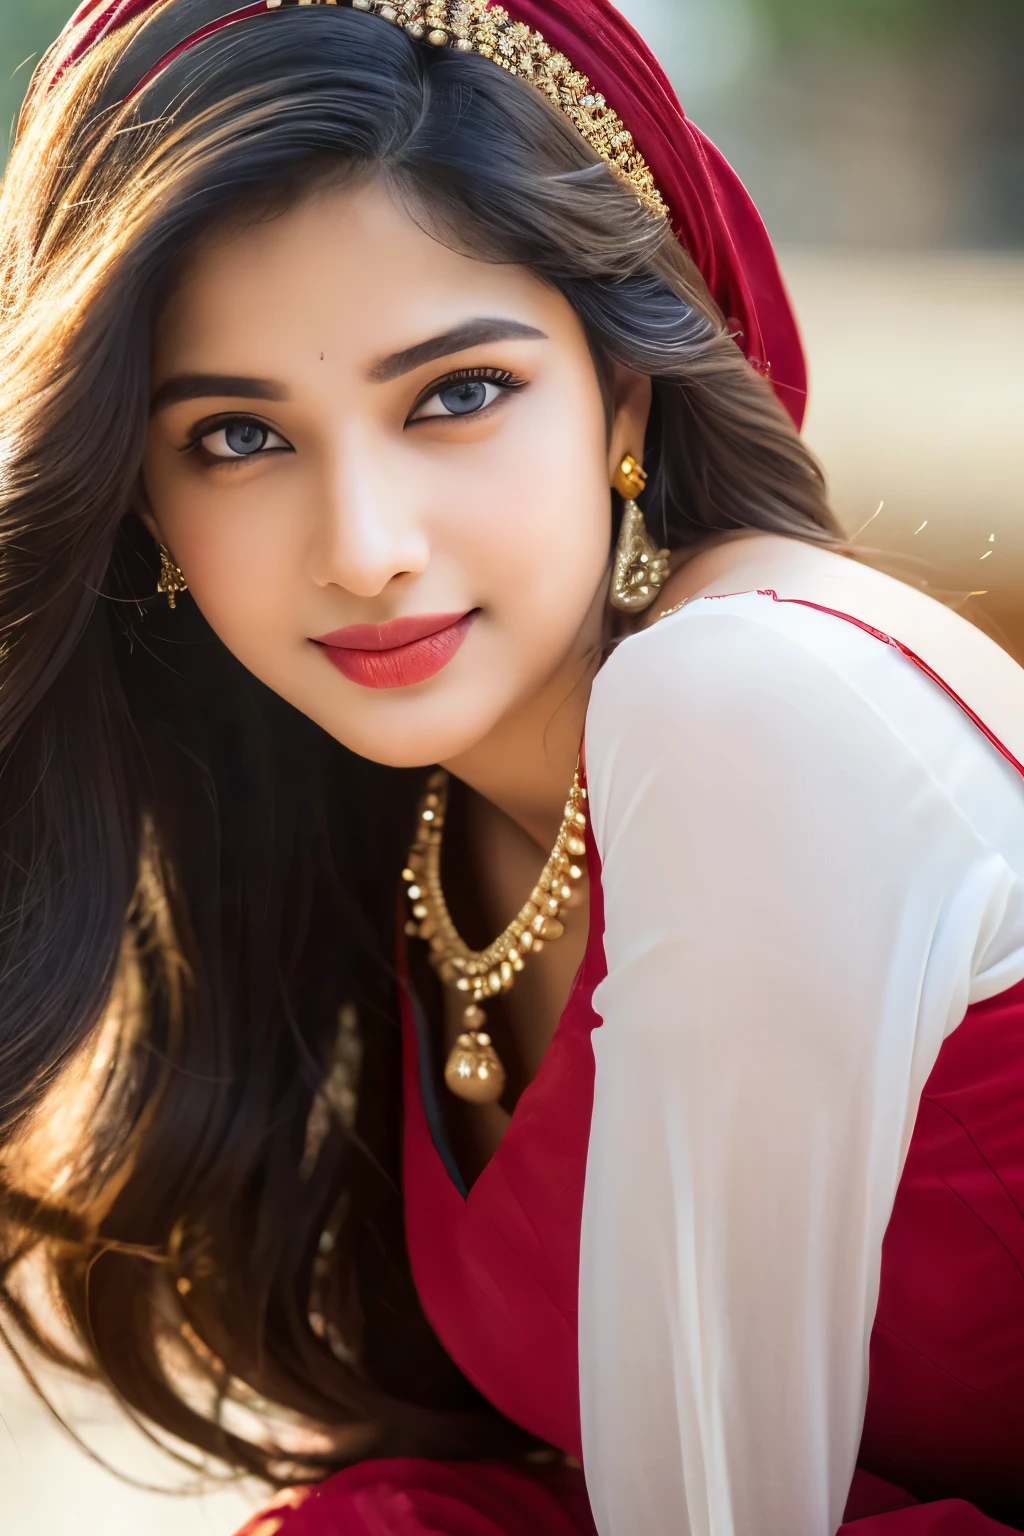 Wear bandhani anarkali dress standing, gorgeous royal, ((Tamanna:1.2)), jewellery, gem, necklace, gold bracelet, anklets, thick lips, skindentation, parted lips, ulzzang-6500-v1.1, portrait of a beautiful Indian woman, From Golden Skin, 27 years old, Pretty woman, Indian model, (in long anarkali dress) (Slim abdomen), (Perfect slim figure), (Dynamic pose), Solo, ((open crotch)), (((bare ass))), (Slim:1.1), 1 woman, (Full figure:0.9), Beautifully detailed sky, sunny day, Mumbai city, On the street, detailed Mumbai street, Indian clothes,(( long sleeve dress)), ((long red anarkali dress)), medium hair, smile, closed mouth, lips, Long red anarkali dress covered with full body, detailed beautiful round eyes, Indian women, Asian women, Beautiful face, photorealistic, rim lighting, two-tone lighting, gold bracelet, thick lips, indentation, parted lips, (detailed eyes), light blonde hair, blue eye, details still clear, honey-coloured, fluffy turned, HDR, shallow depth of field, broad light, backlighting, bloom, light sparkles, chromatic aberration, sharp focus, Nikon Z 85mm, unparalleled masterpiece, ultra-realistic 8k photos, best quality masterpiece, best quality, (photorealistic:1.2), (realistic:1.5), (hyperrealistic:1.2),(photorealistic face:1.2), (close up:1.6), (light blonde hair), (blue eyes), ((big cheeks)), (beautiful face:1.8), (detailed face:1.6), (medium breast:1.2), (detailed bright eyes:1.5), (eyelashes:1.4), (smiling:1.3), (detailed long black hair), (long red anarkali dress:1.5), (narrow waist:1.5), (thigh: 1.5), (realistic human skin:1.6), (full curvy body) (detailed eyes), (seductive pose), (detailed facial features), (detailed clothes features), (necklace), (earrings), (bracelet), ( Long red bandhani anarkali dress), (Photorealistic:1.4), (High Quality: 1.2), Raw photo, (Perfect body shape), Uniform, Deep shadows, Unobtrusive, Cold light 12000K,